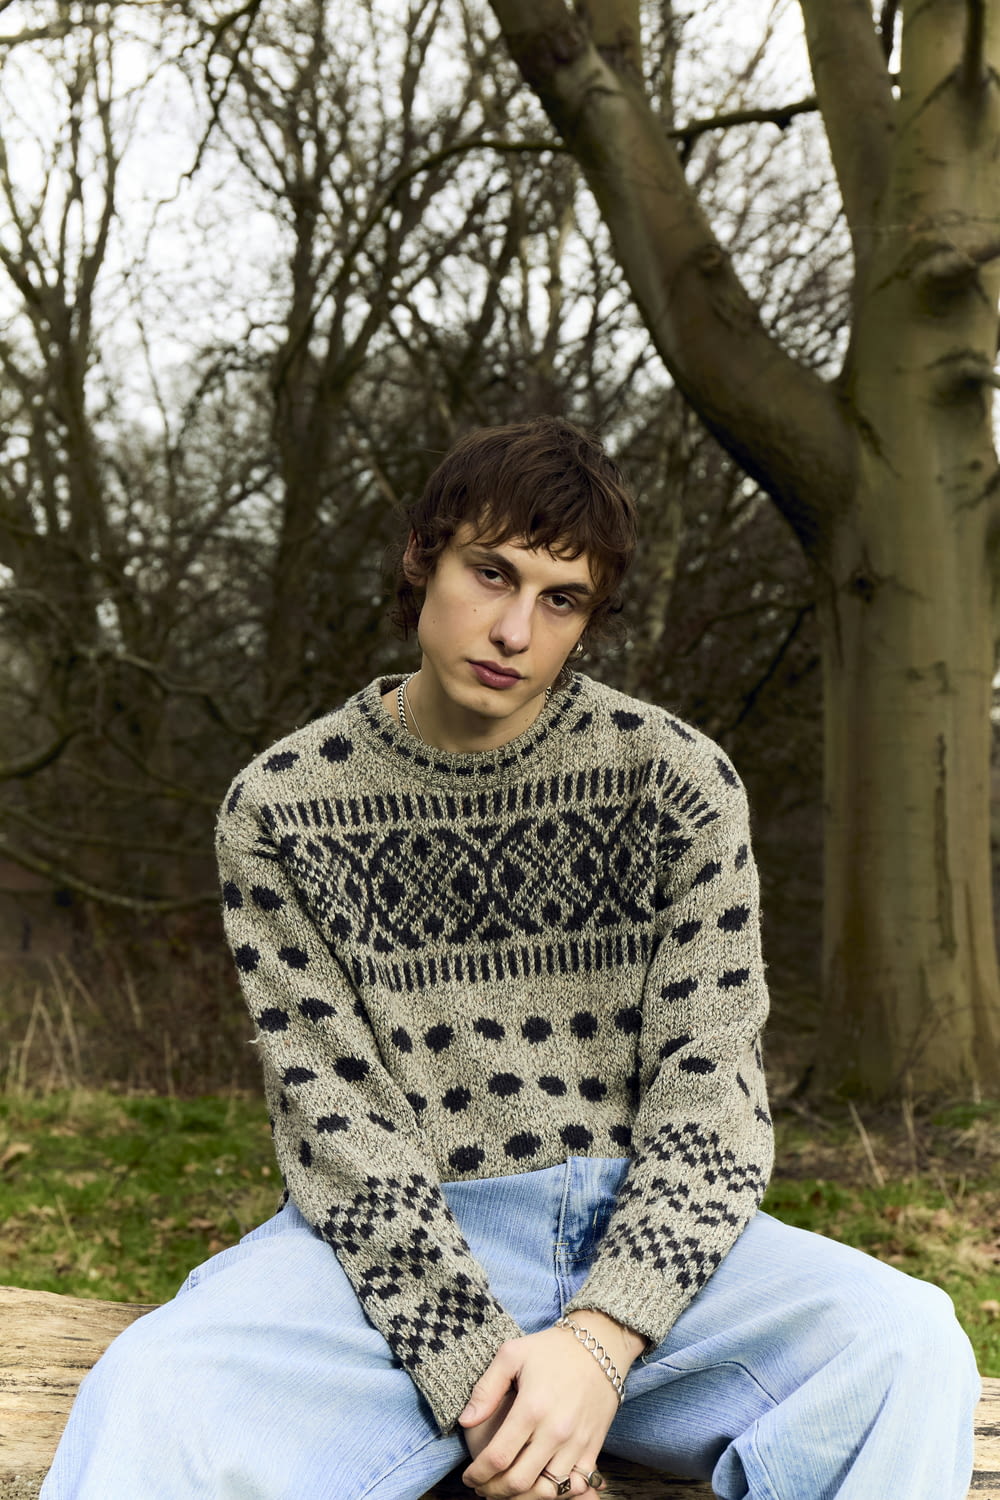 a young man sitting on a wooden bench wearing a sweater